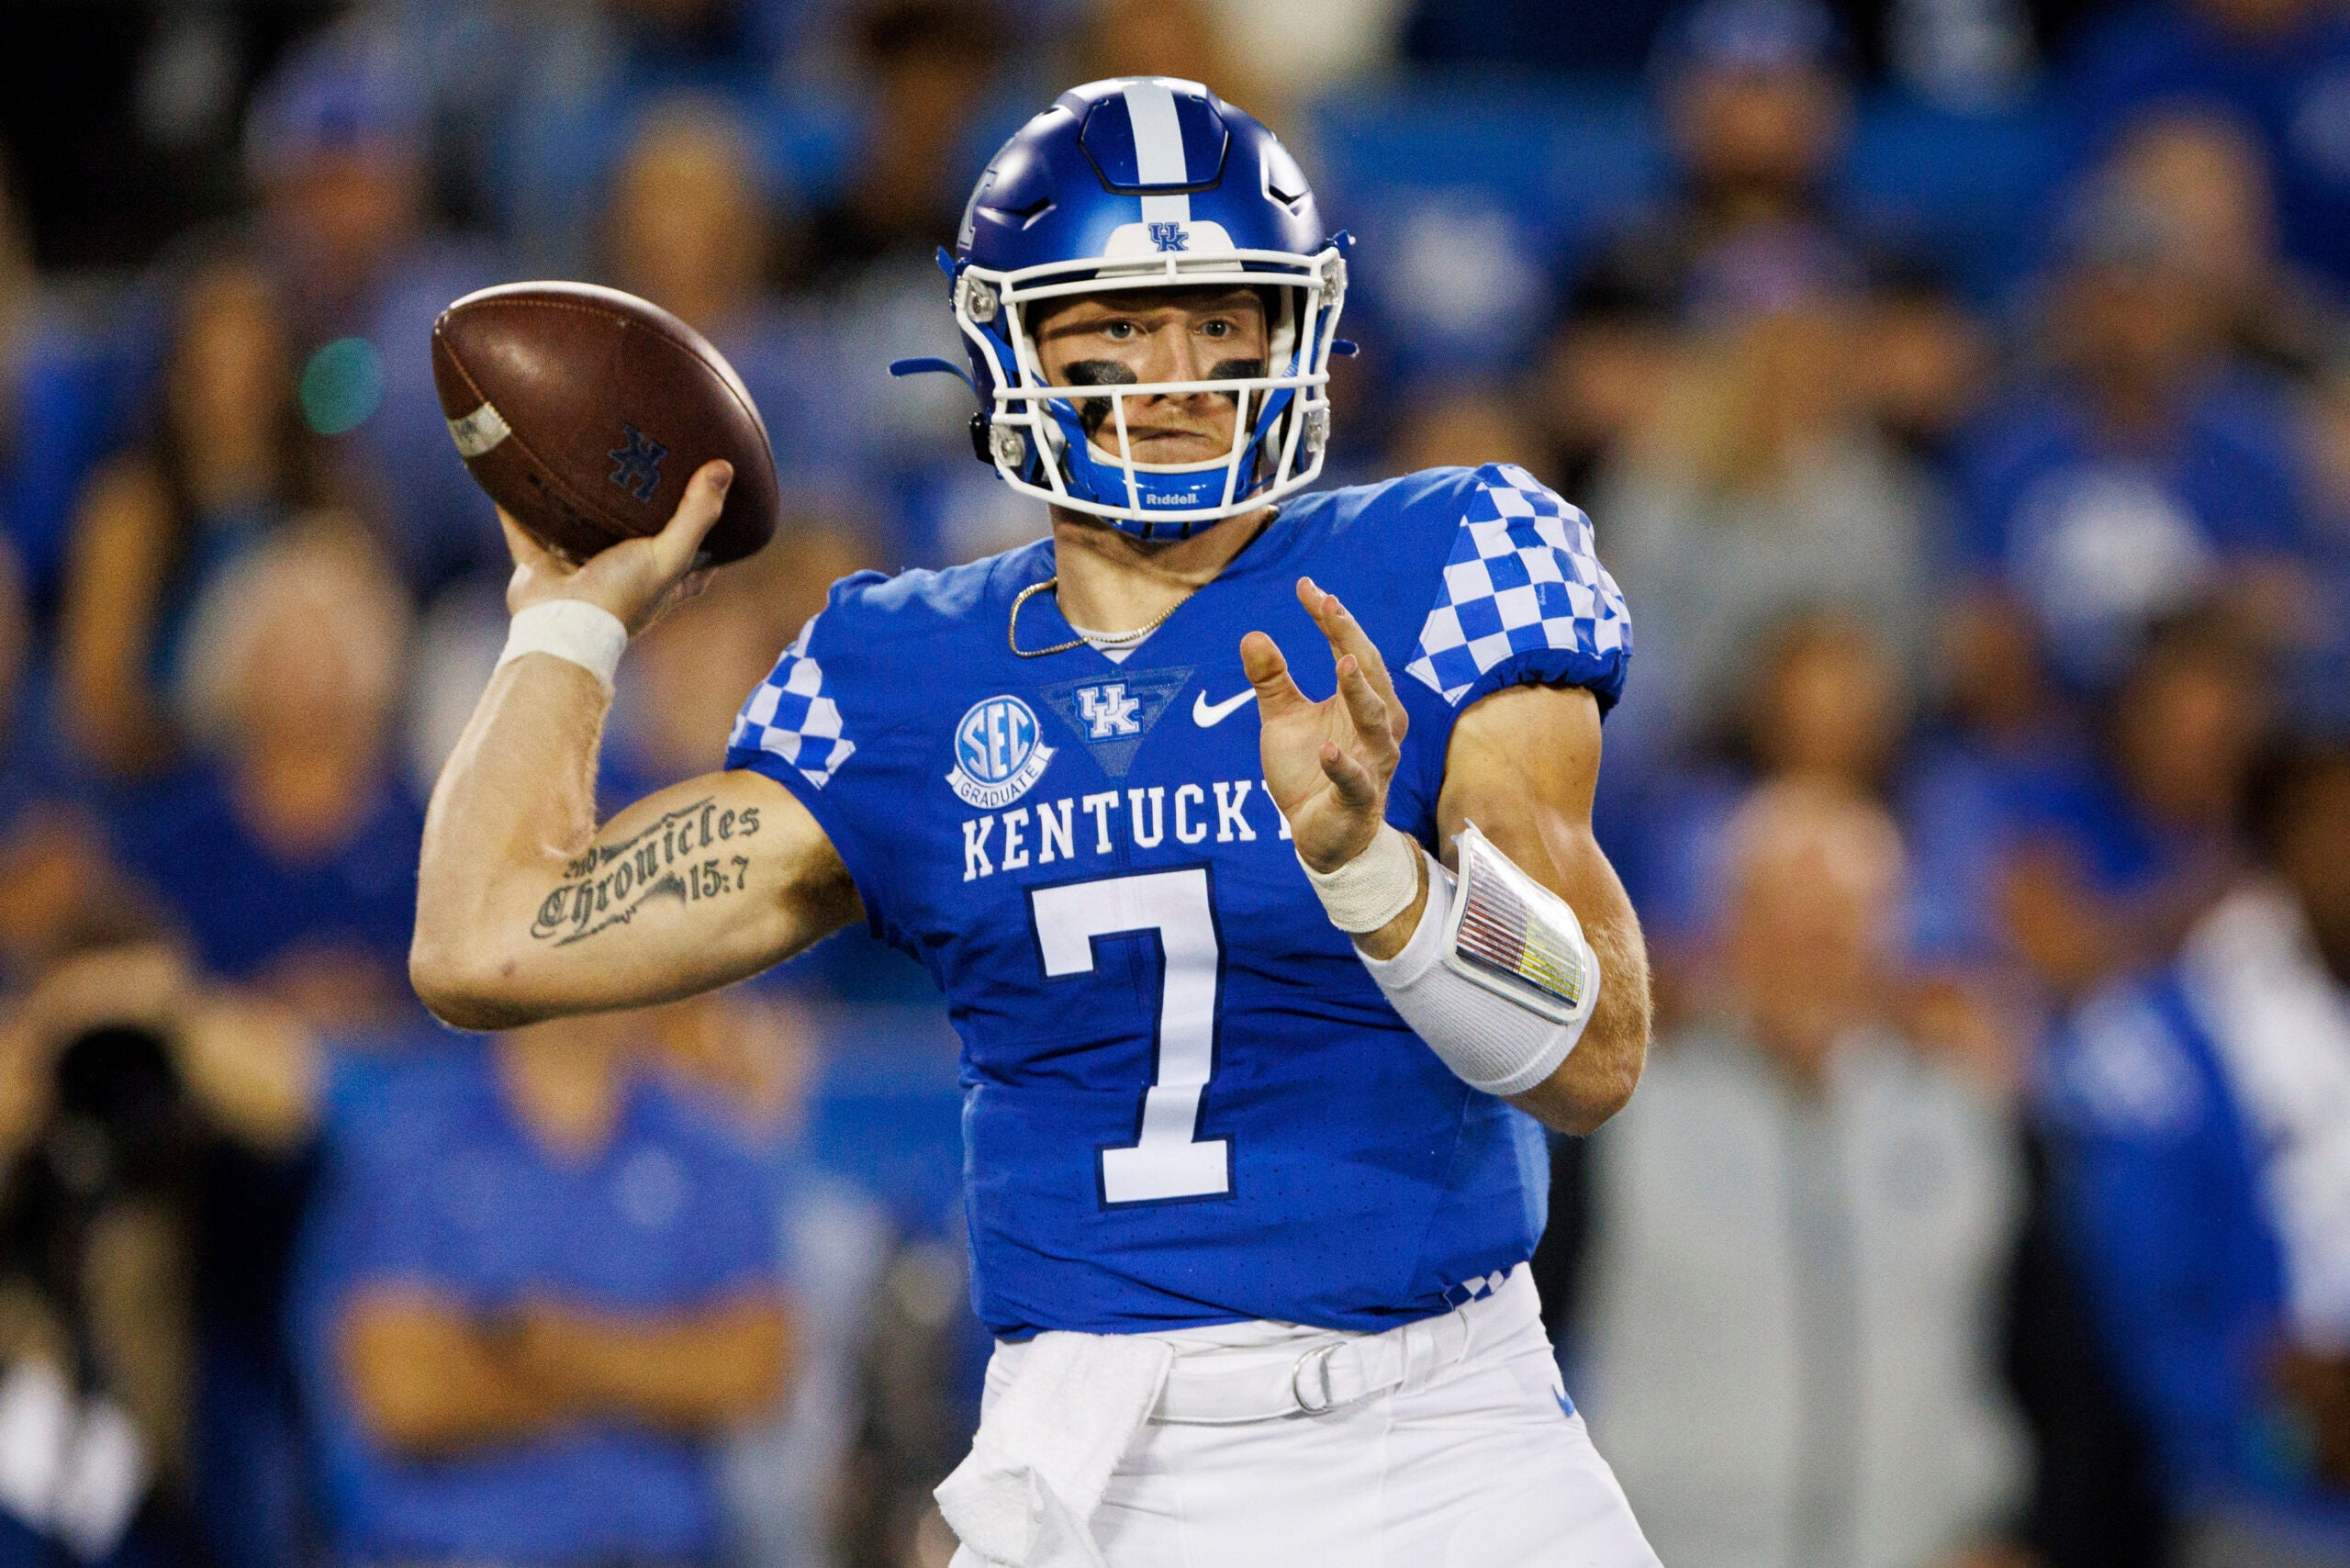 Kentucky quarterback Will Levis (7) throws a pass during the first half of an NCAA college football game against Northern Illinois in Lexington, Ky., Saturday, Sept. 24, 2022.